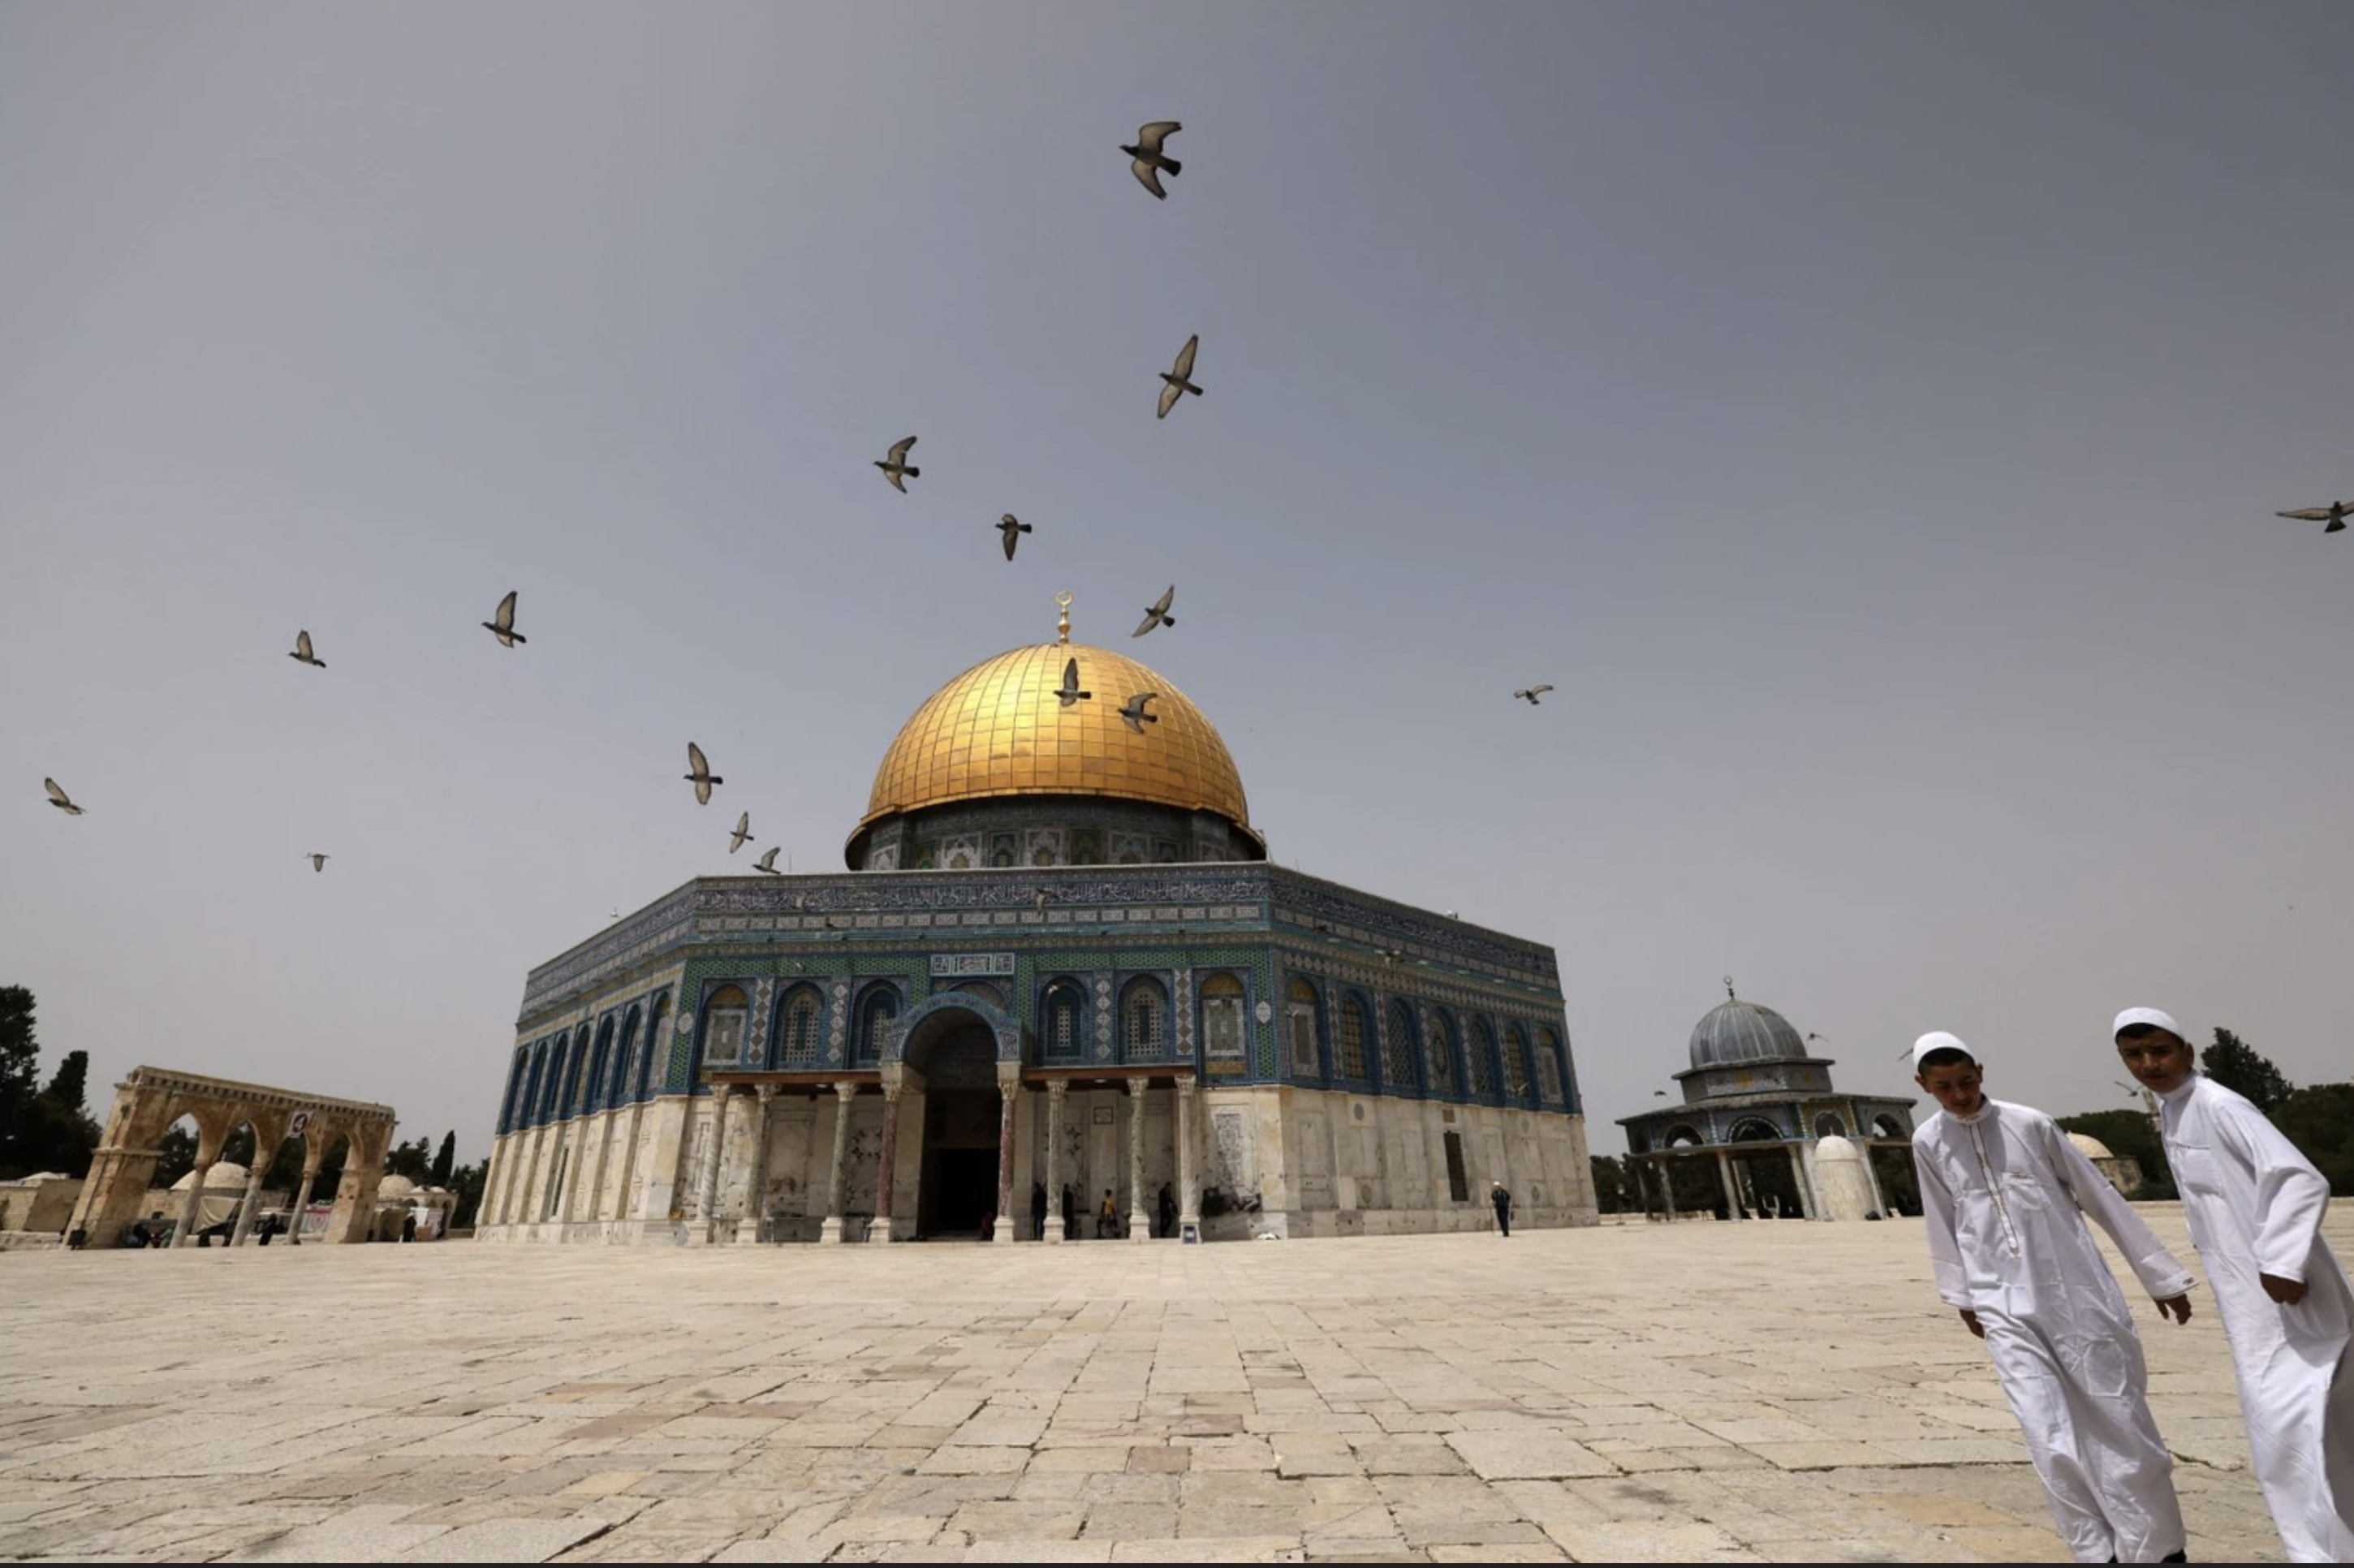 Palestinian Muslims walk in front of the Dome of Rock at the Al-Aqsa mosque in Jerusalem's Old City, occupied Palestine, 17 April 2022. – Photo by AFP.